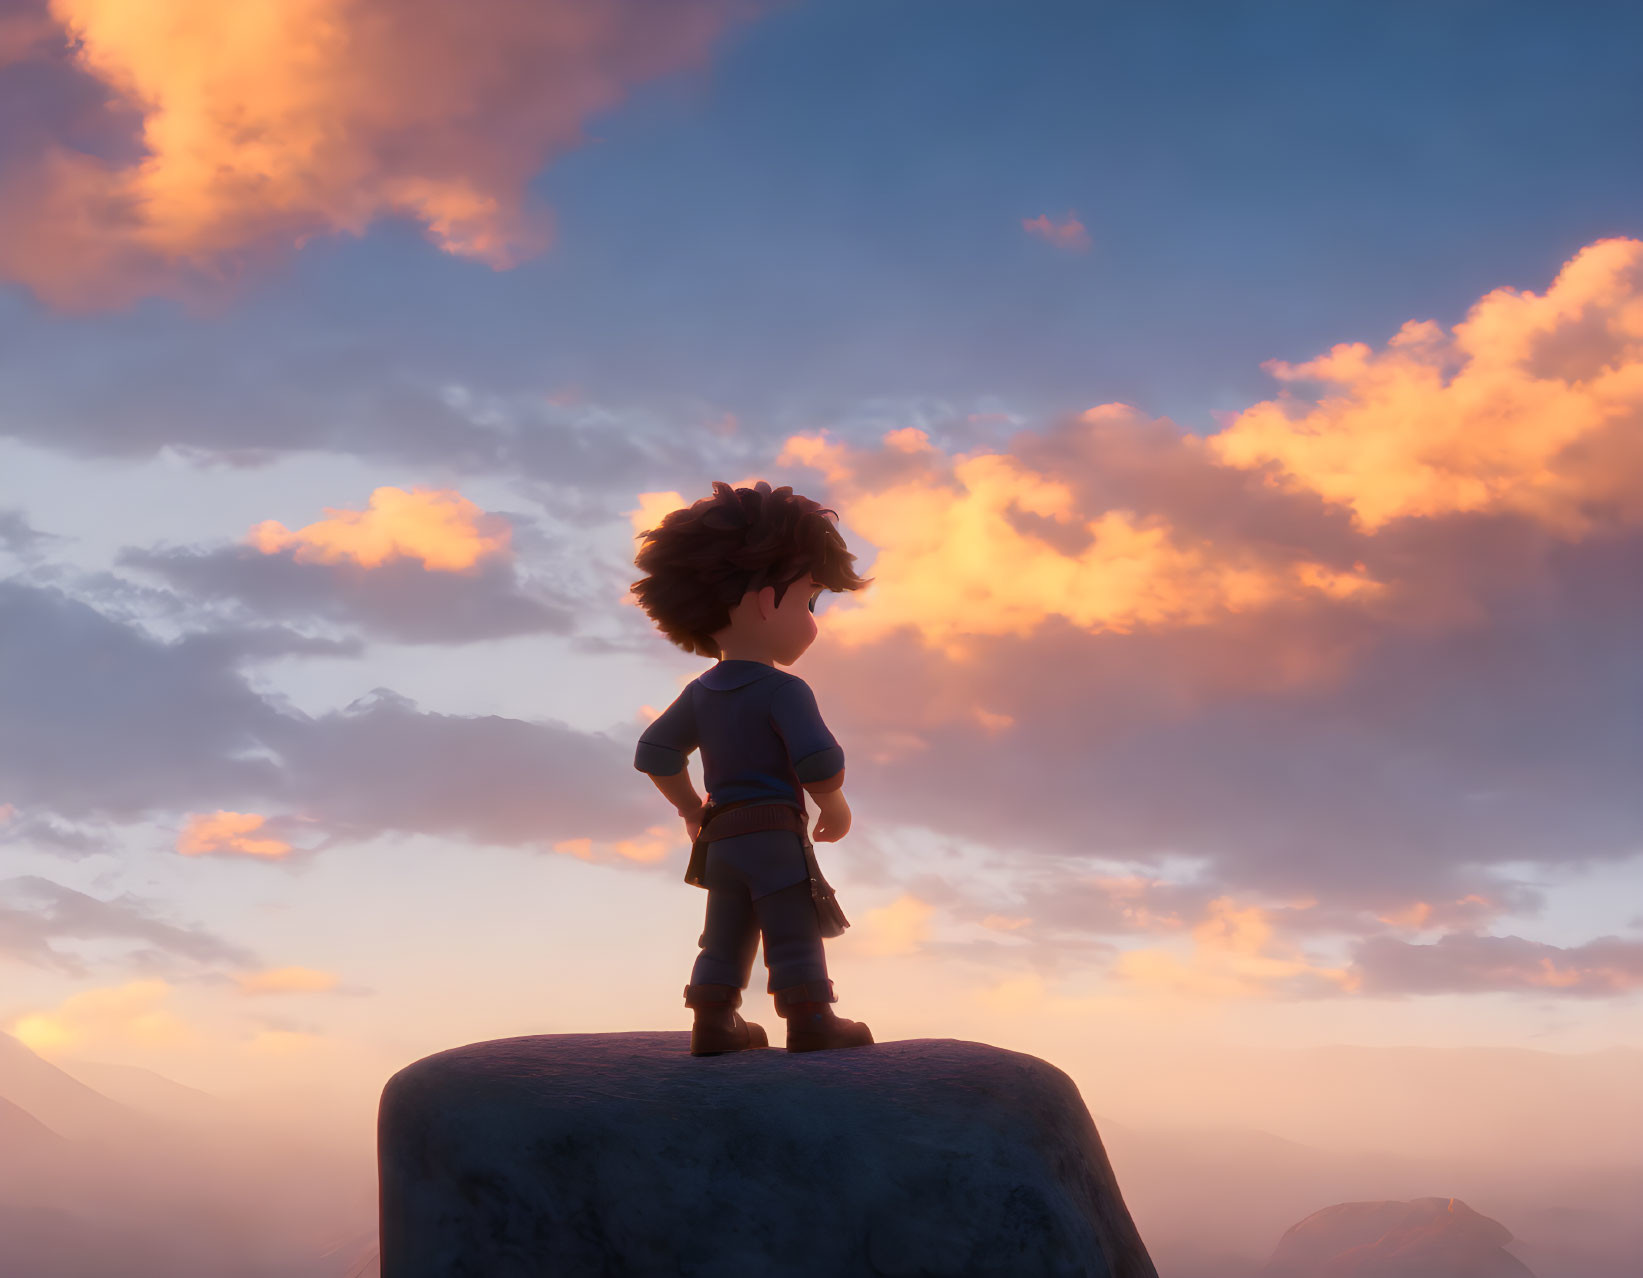 Young boy standing on a rock with clouds in back